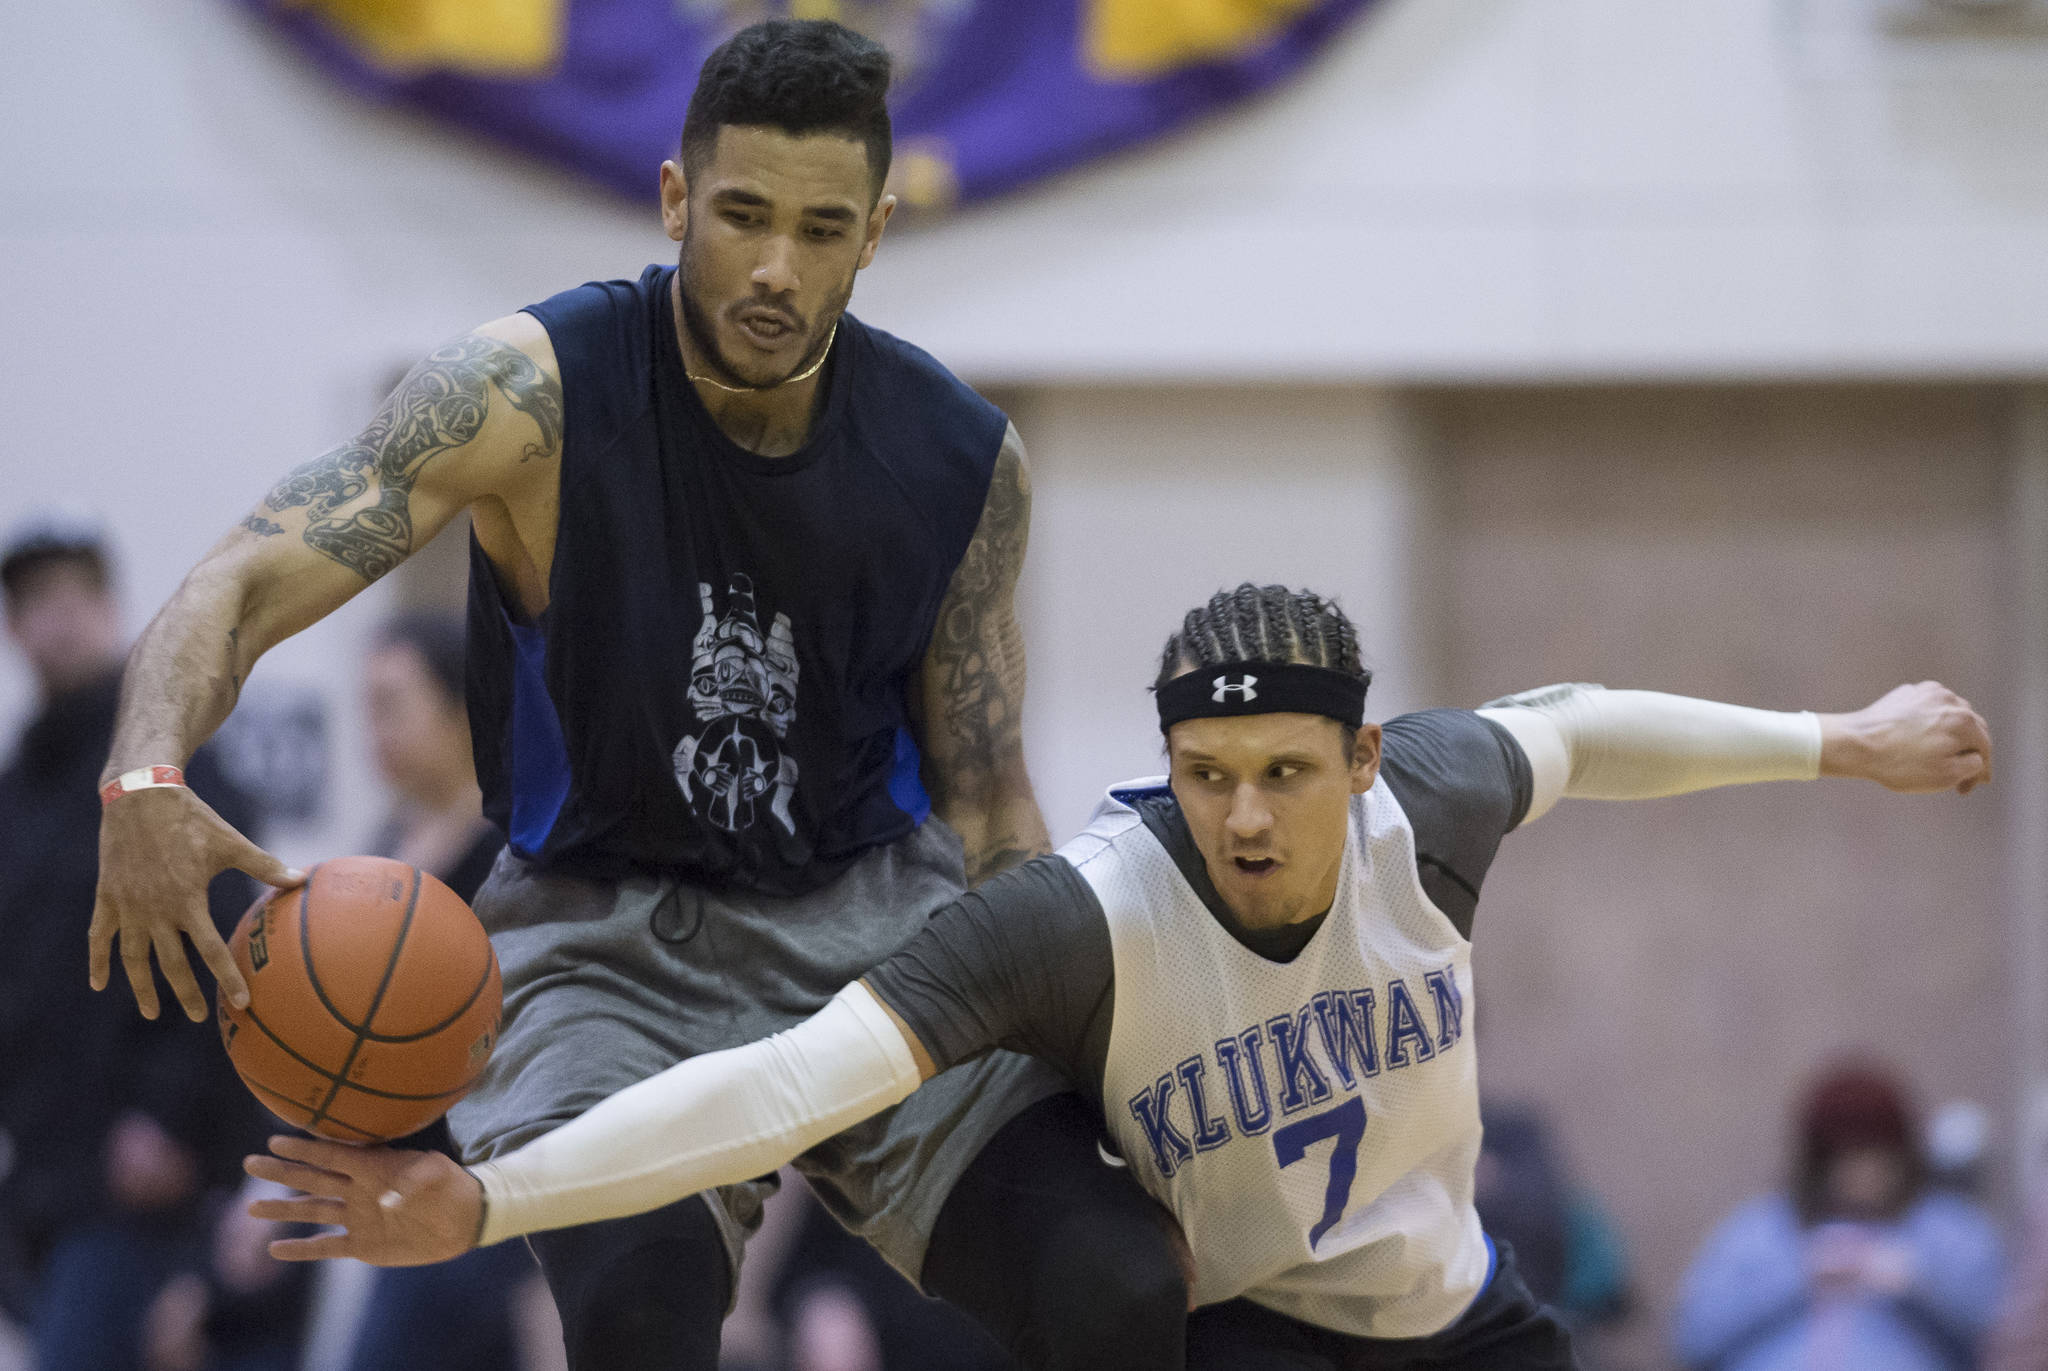 Klukwan’s Tony Tompkins, right, attempts a steal against Hydaburg’s Damen Bell-Holter in their B bracket game at the Juneau Lion’s Gold Medal Basketball Tournament at Juneau-Douglas High School on Monday, March 19, 2018. Klukwan won 65-61. (Michael Penn | Juneau Empire)